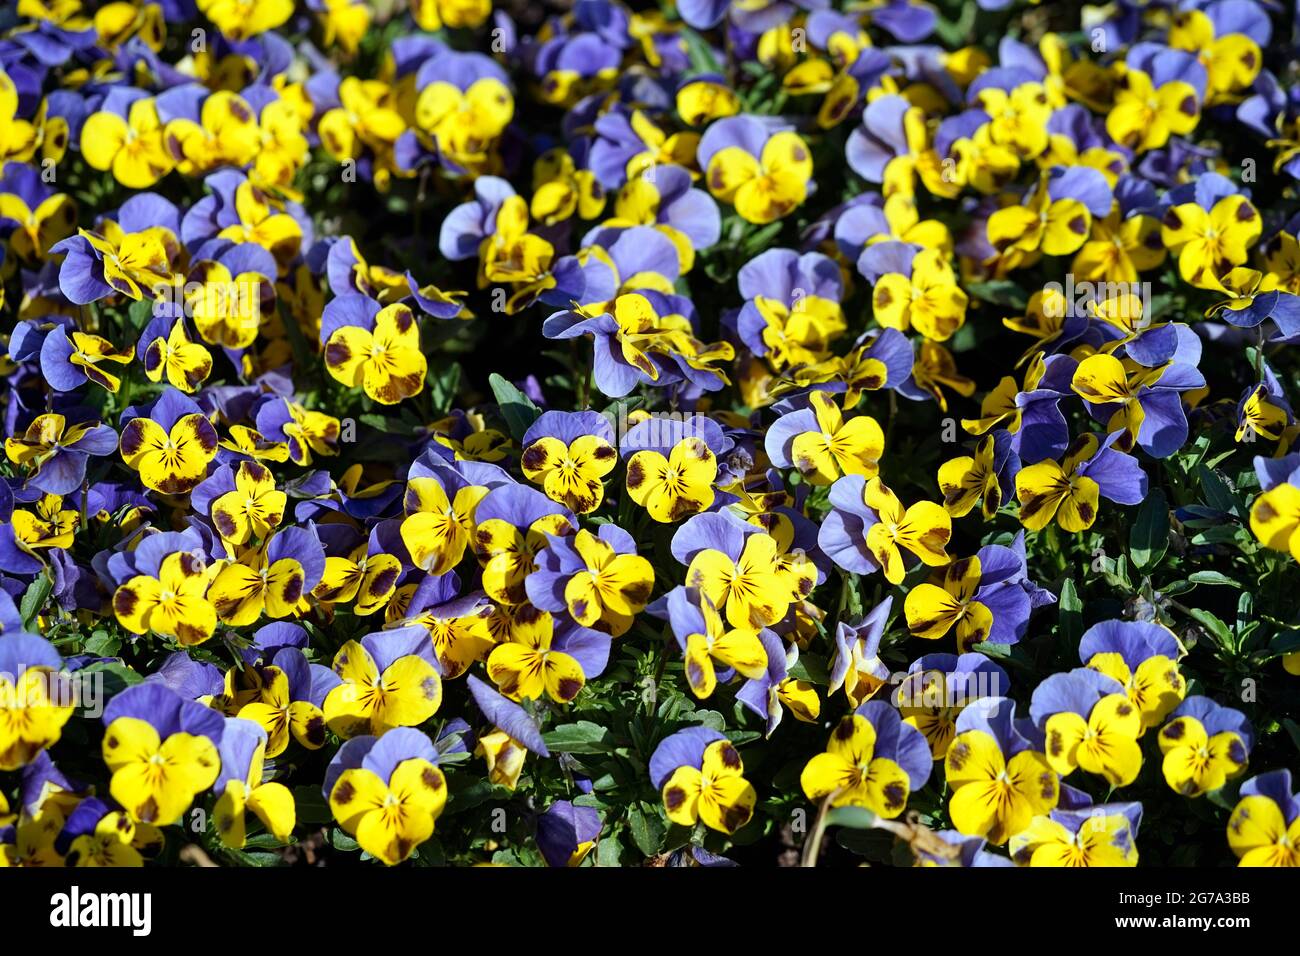 Germany, Bavaria, flowerbed, horned violets, pansies, yellow-blue, screen-filling Stock Photo